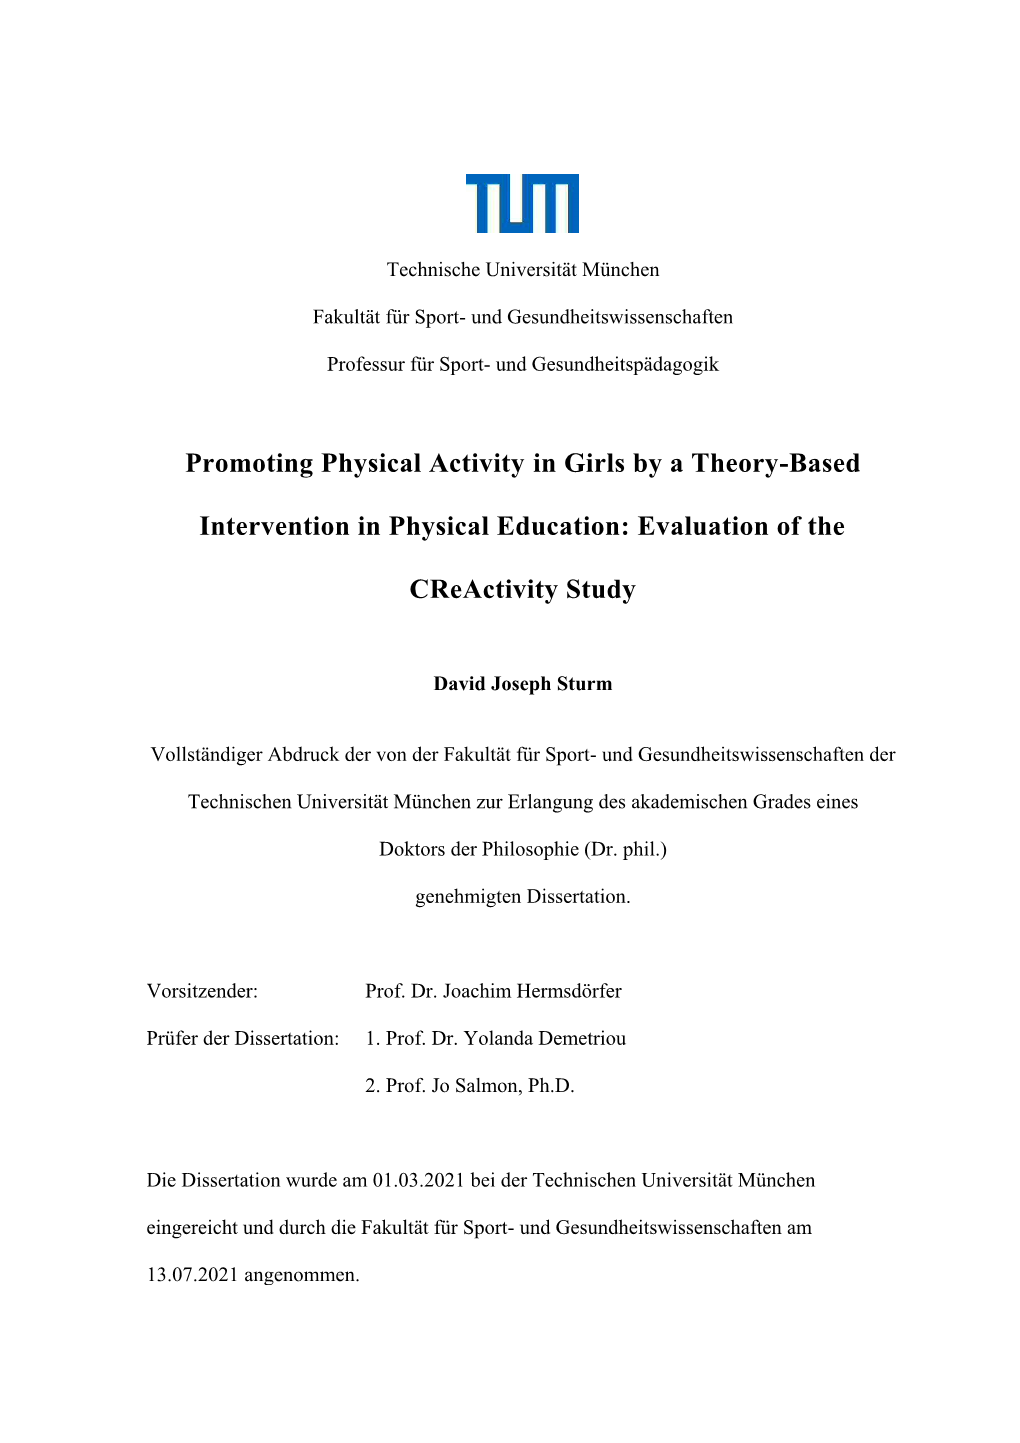 Promoting Physical Activity in Girls by a Theory-Based Intervention In